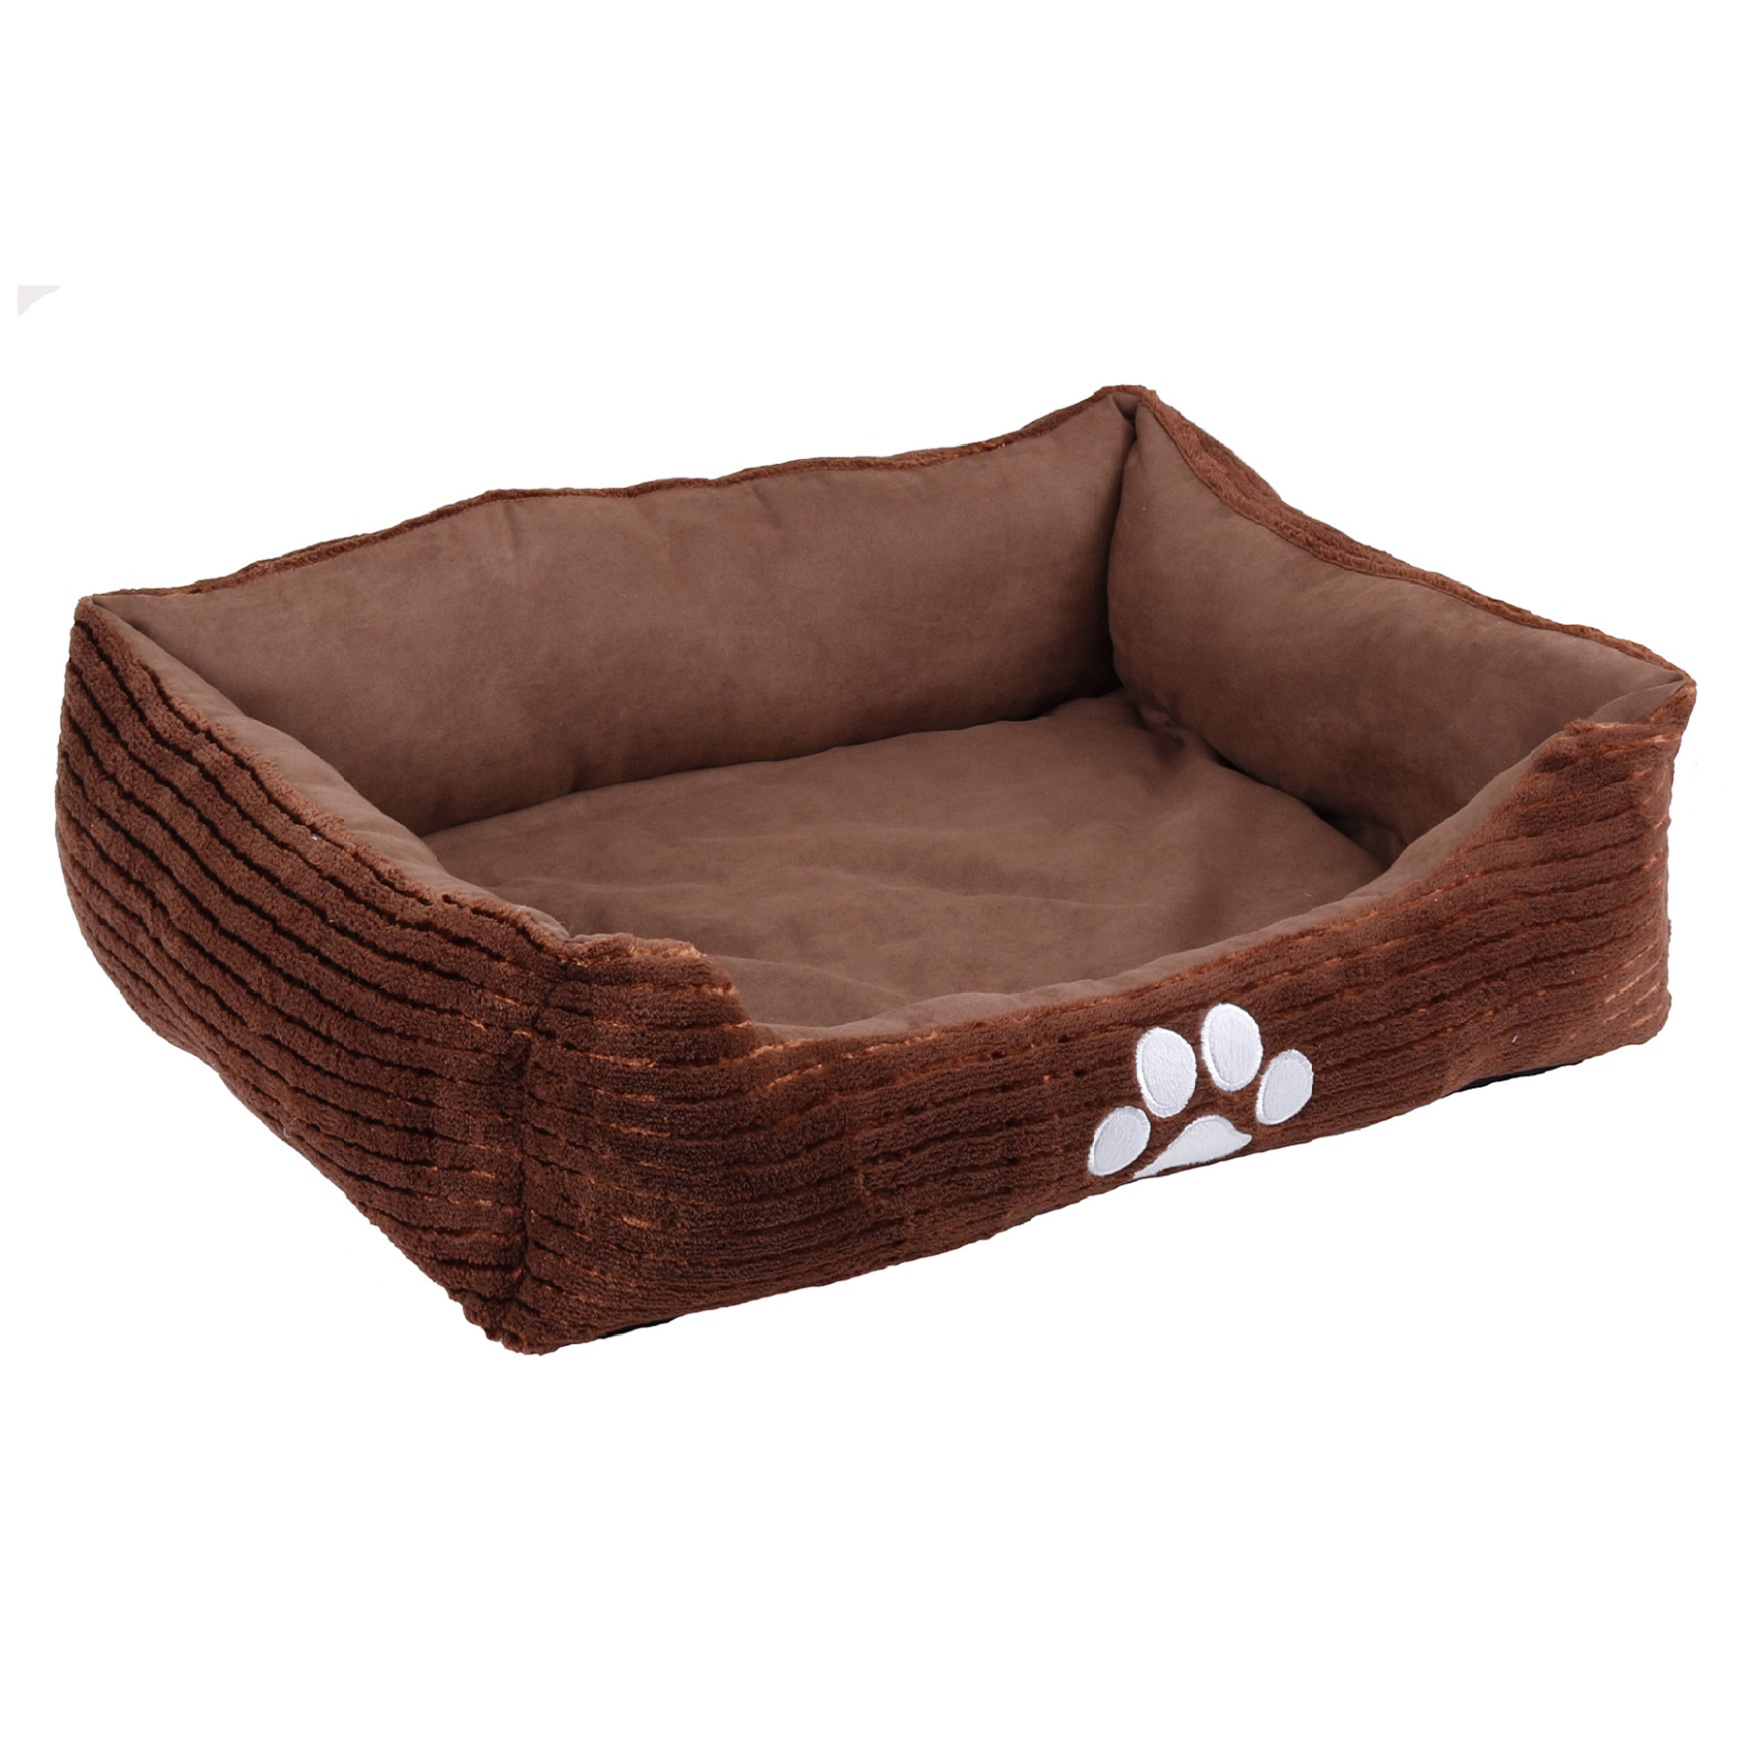 Orthopedic rectangle bolster Pet Bed,Dog Bed, super soft plush, Large 34x24 inches COFFEE, BROWN